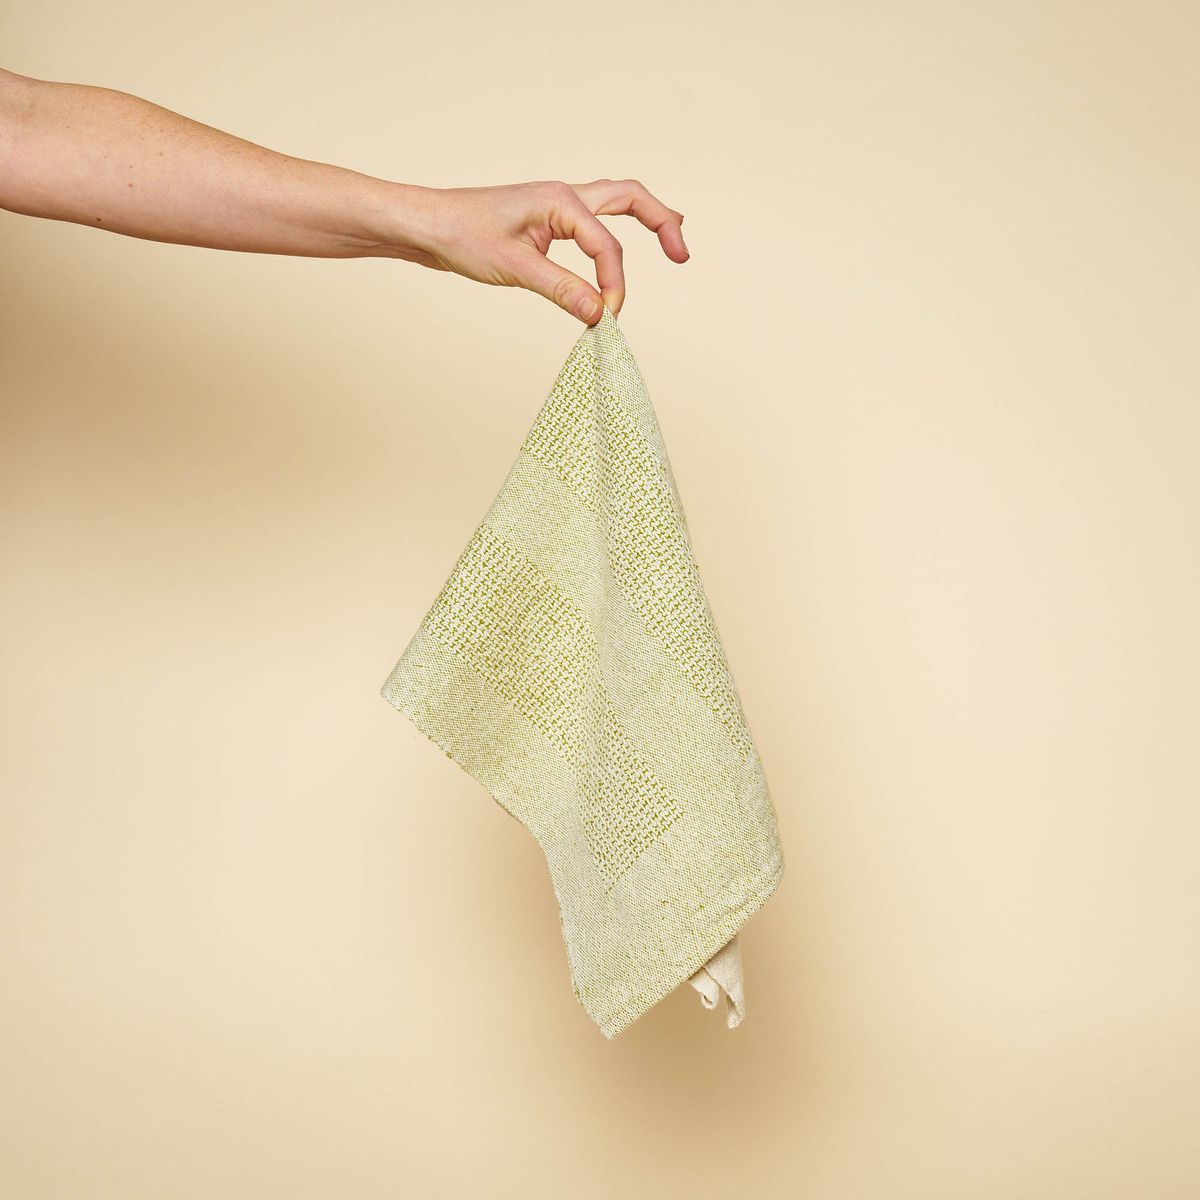 A finger holding up a green-and-natural woven tea towel